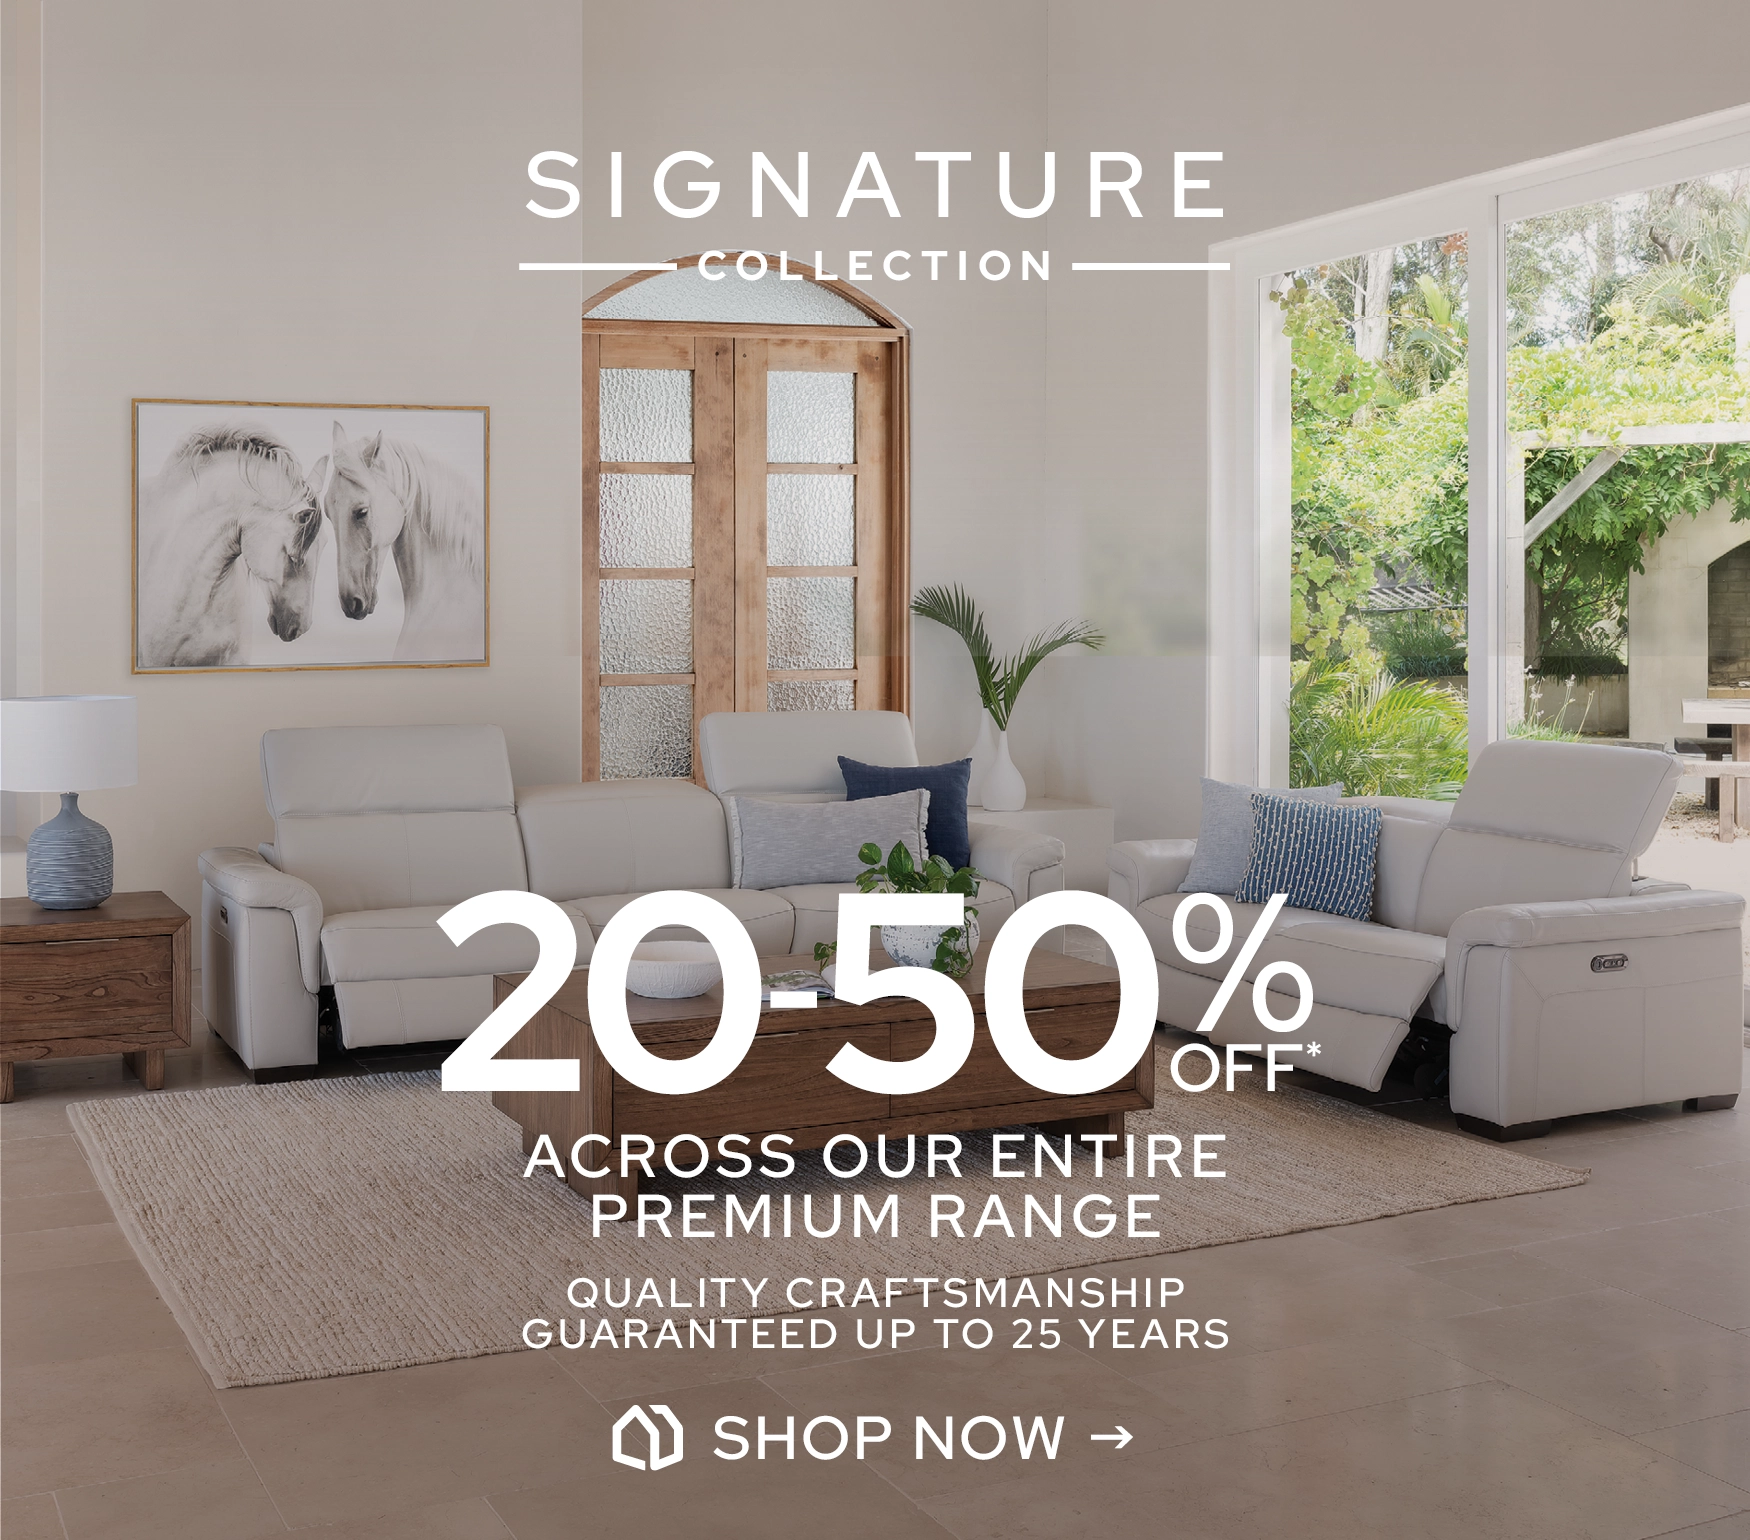 Signature Collection Offer^